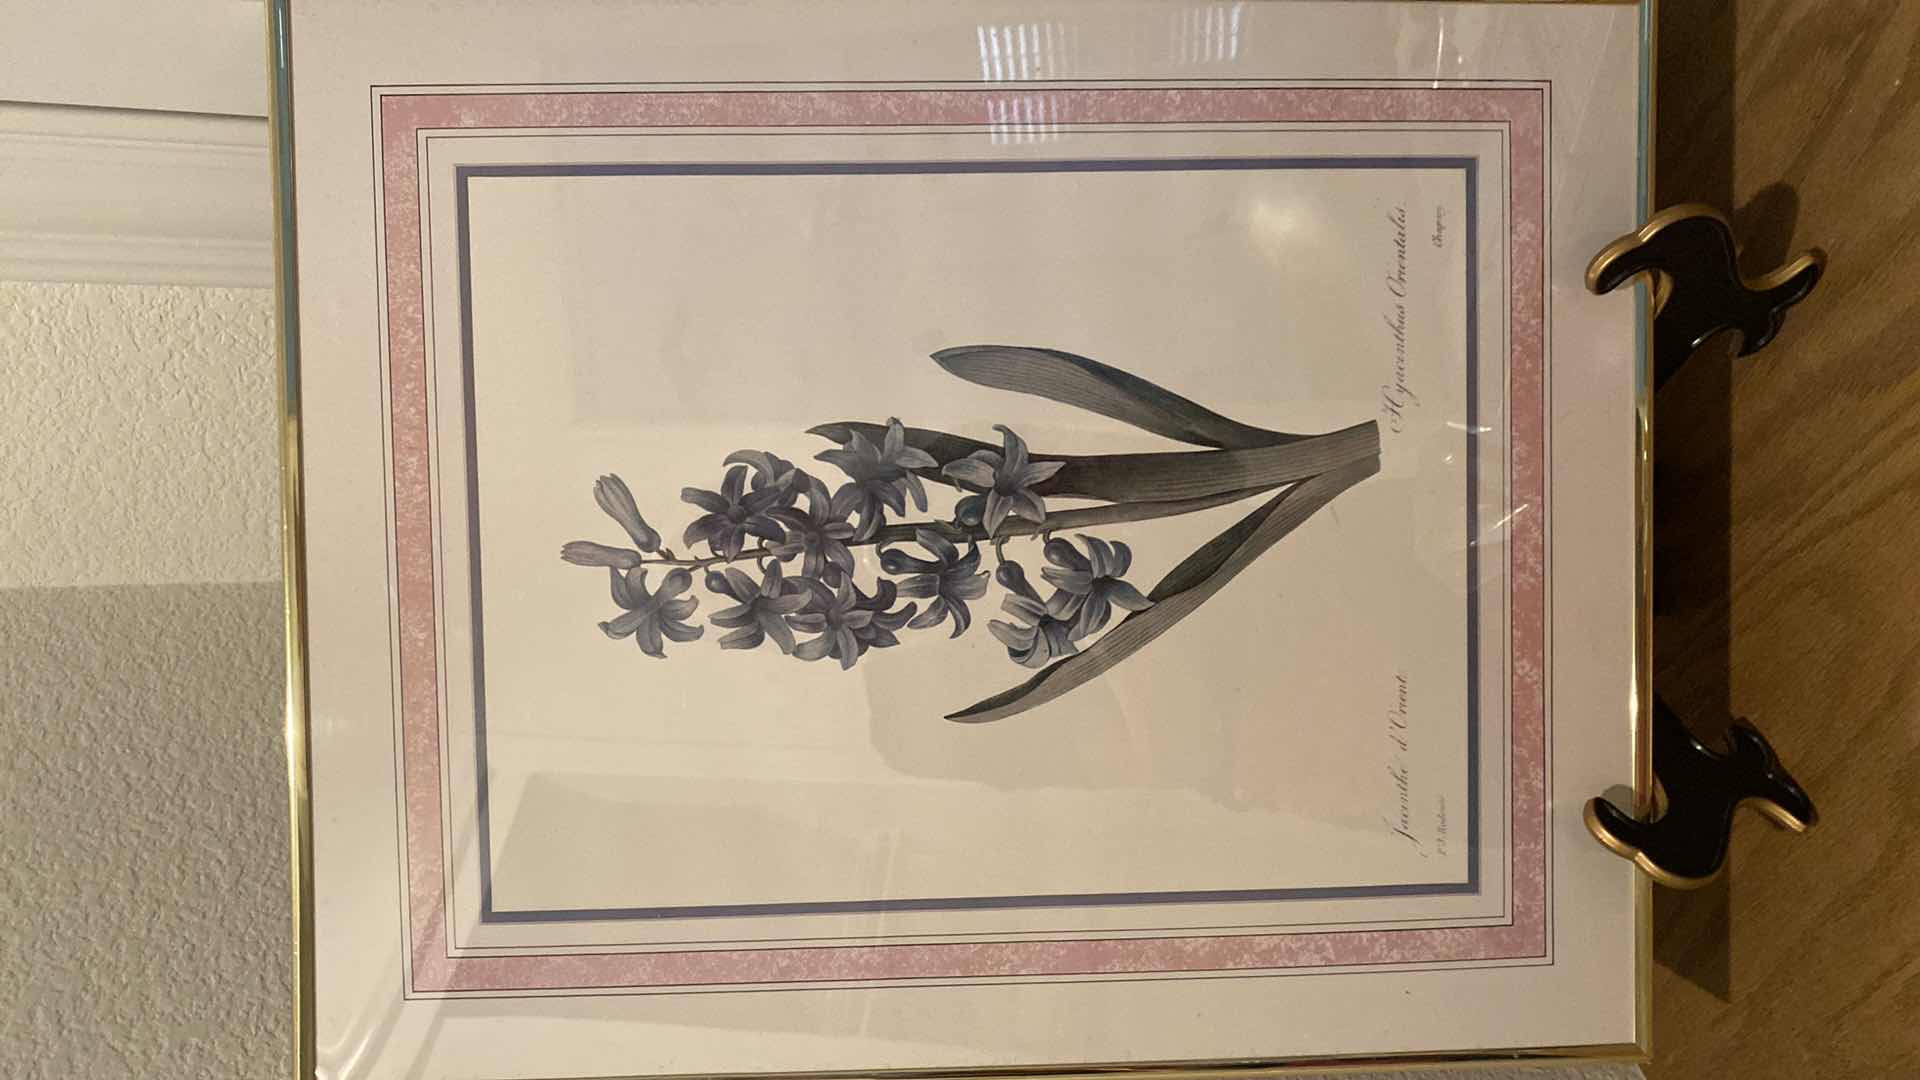 Photo 2 of 3 BOTANICAL FRAMED ART LARGEST 16” X 20” AND GLASS PAPER WEIGHT